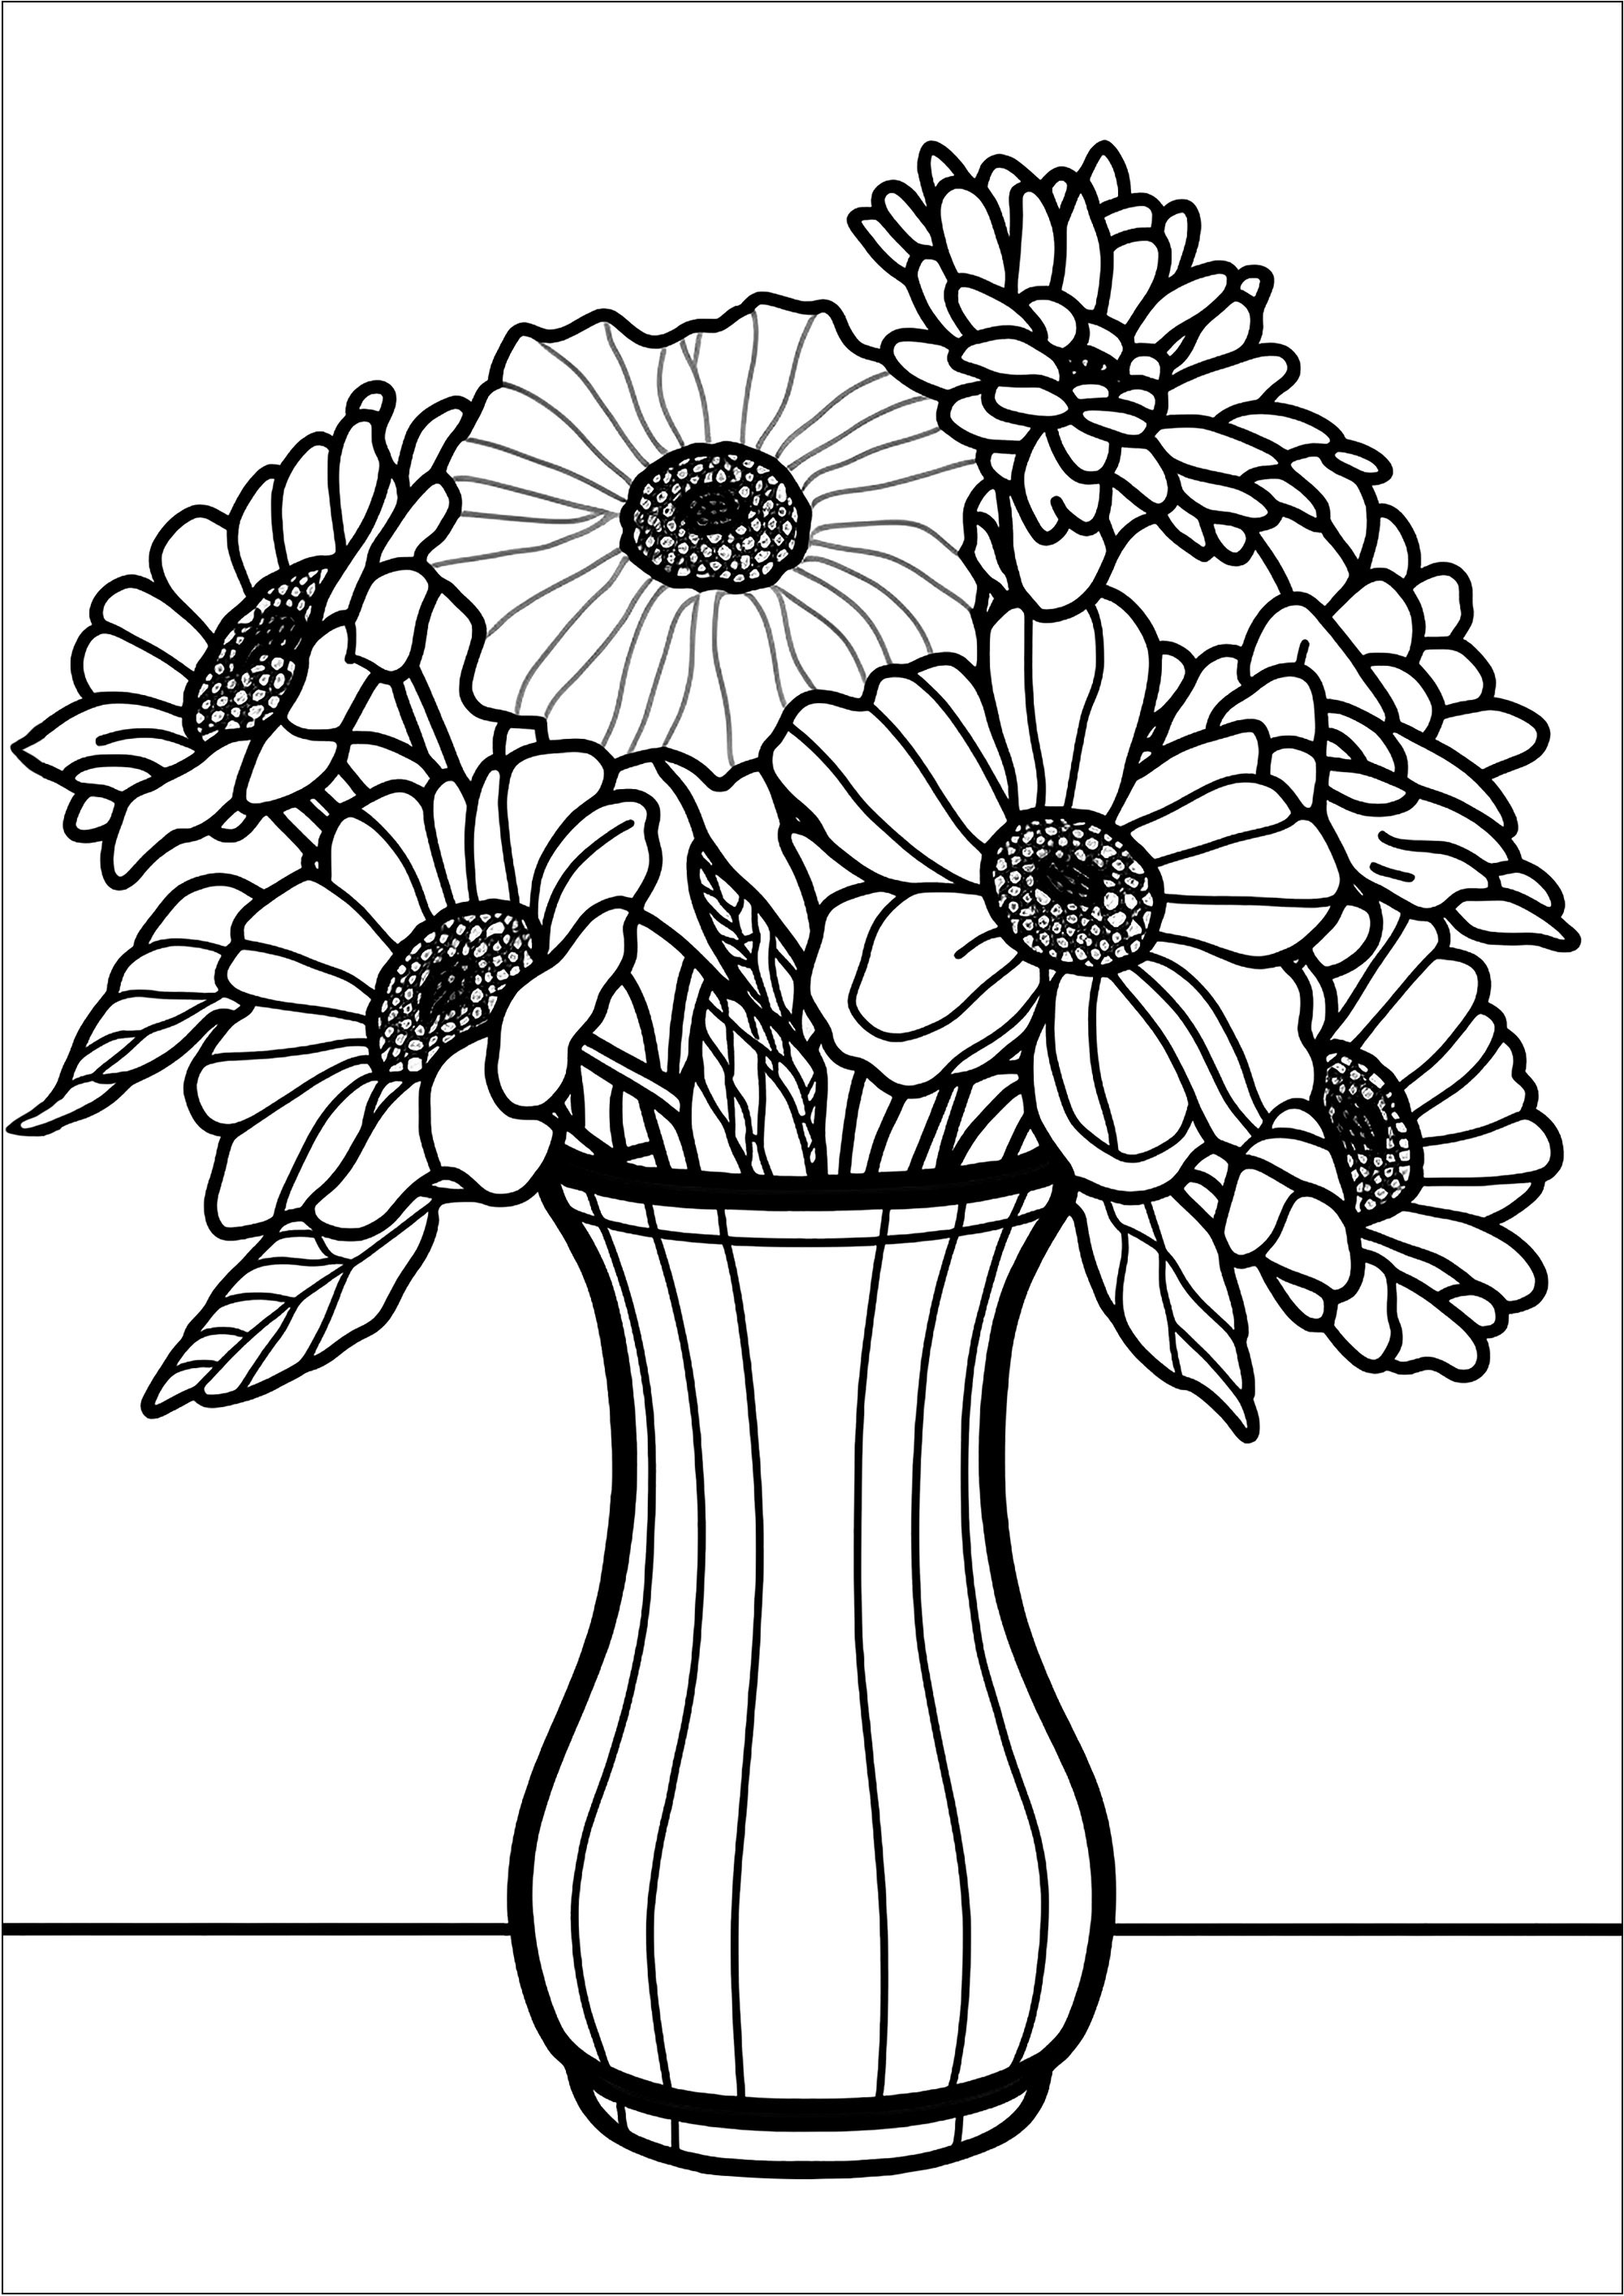 Flowers in a vase   Flowers Kids Coloring Pages